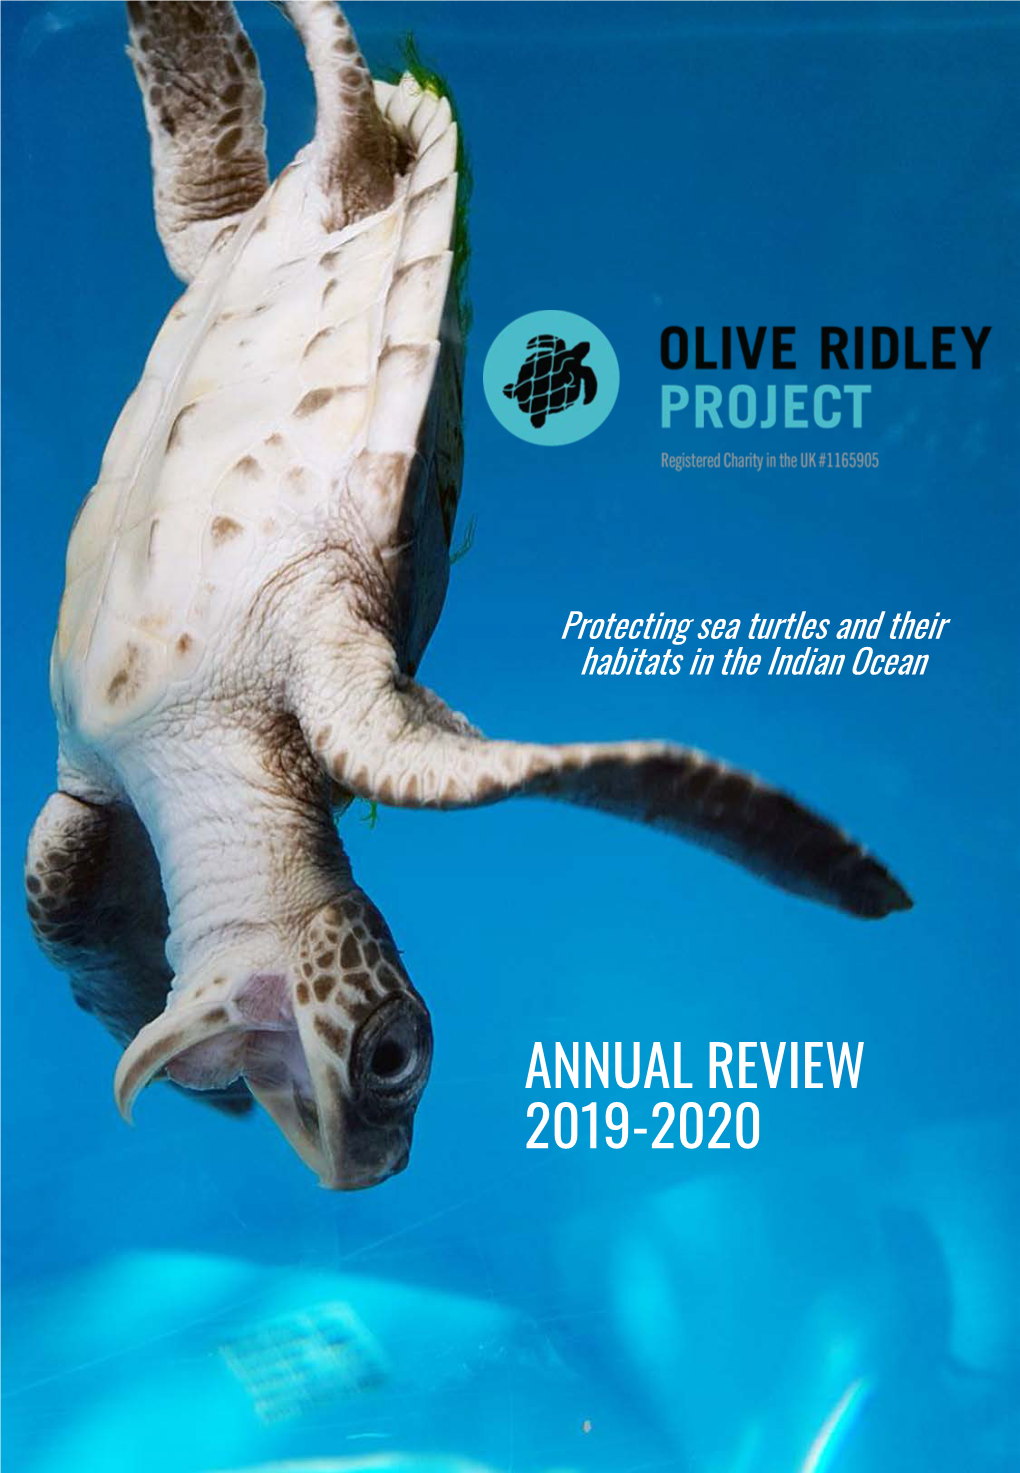 ORP Annual Review 2019-2020